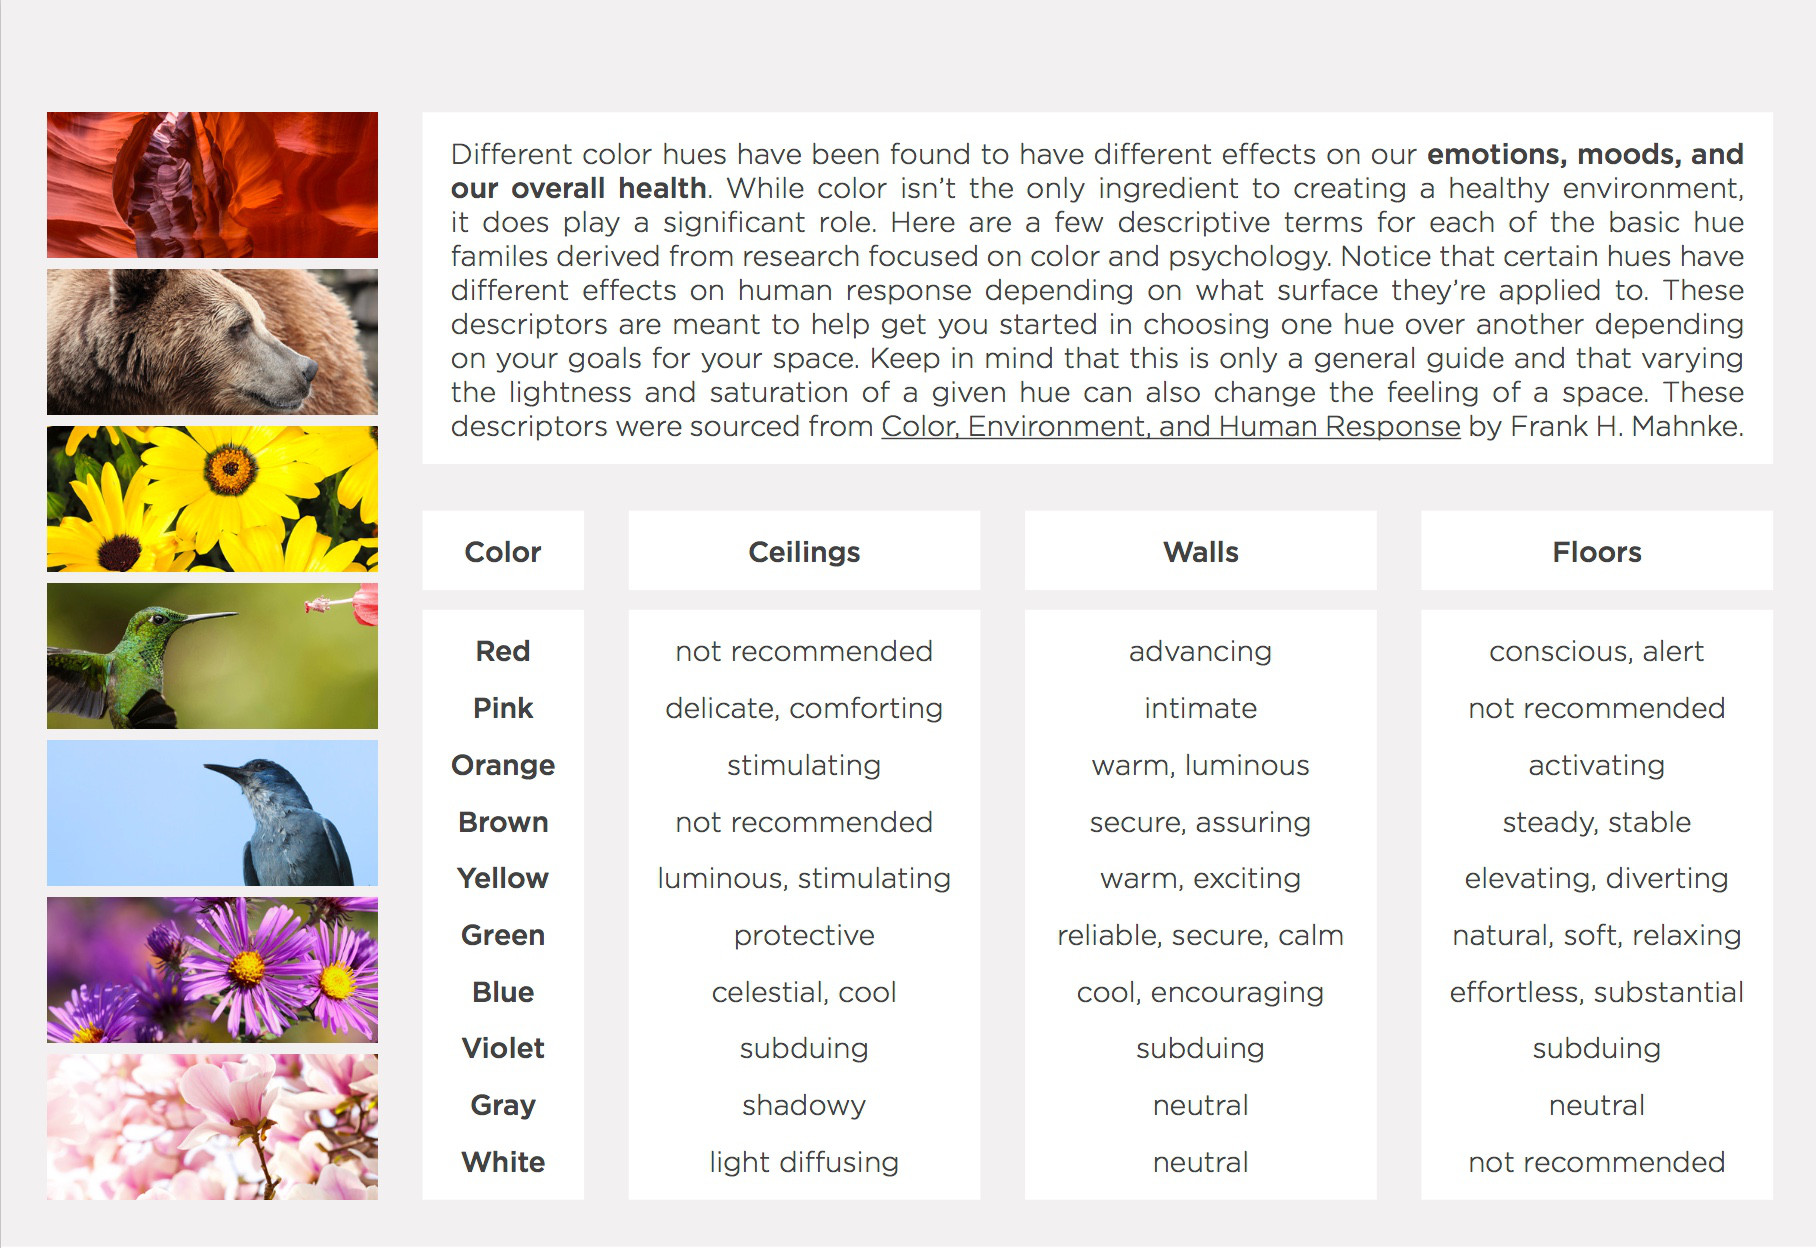 Different color hues have been found to have different effects on our emotions, moods, and our overall health. While color isn’t the only ingredient to creating a healthy environment, it does play a significant role. Here are a few descriptive terms for each of the basic hue families derived from research focused on color and psychology. Notice that certain hues have different effects on human response depending on what surface they’re applied to. These descriptors are meant to help get you started in choosing one hue over another depending on your goals for your space. Keep in mind that this in only a general guide and that varying the lightness and saturation of a given hue can also change the feeling of a space. These descriptors were sourced from Color, Environment, and Human Response by Frank H. Mahnke.